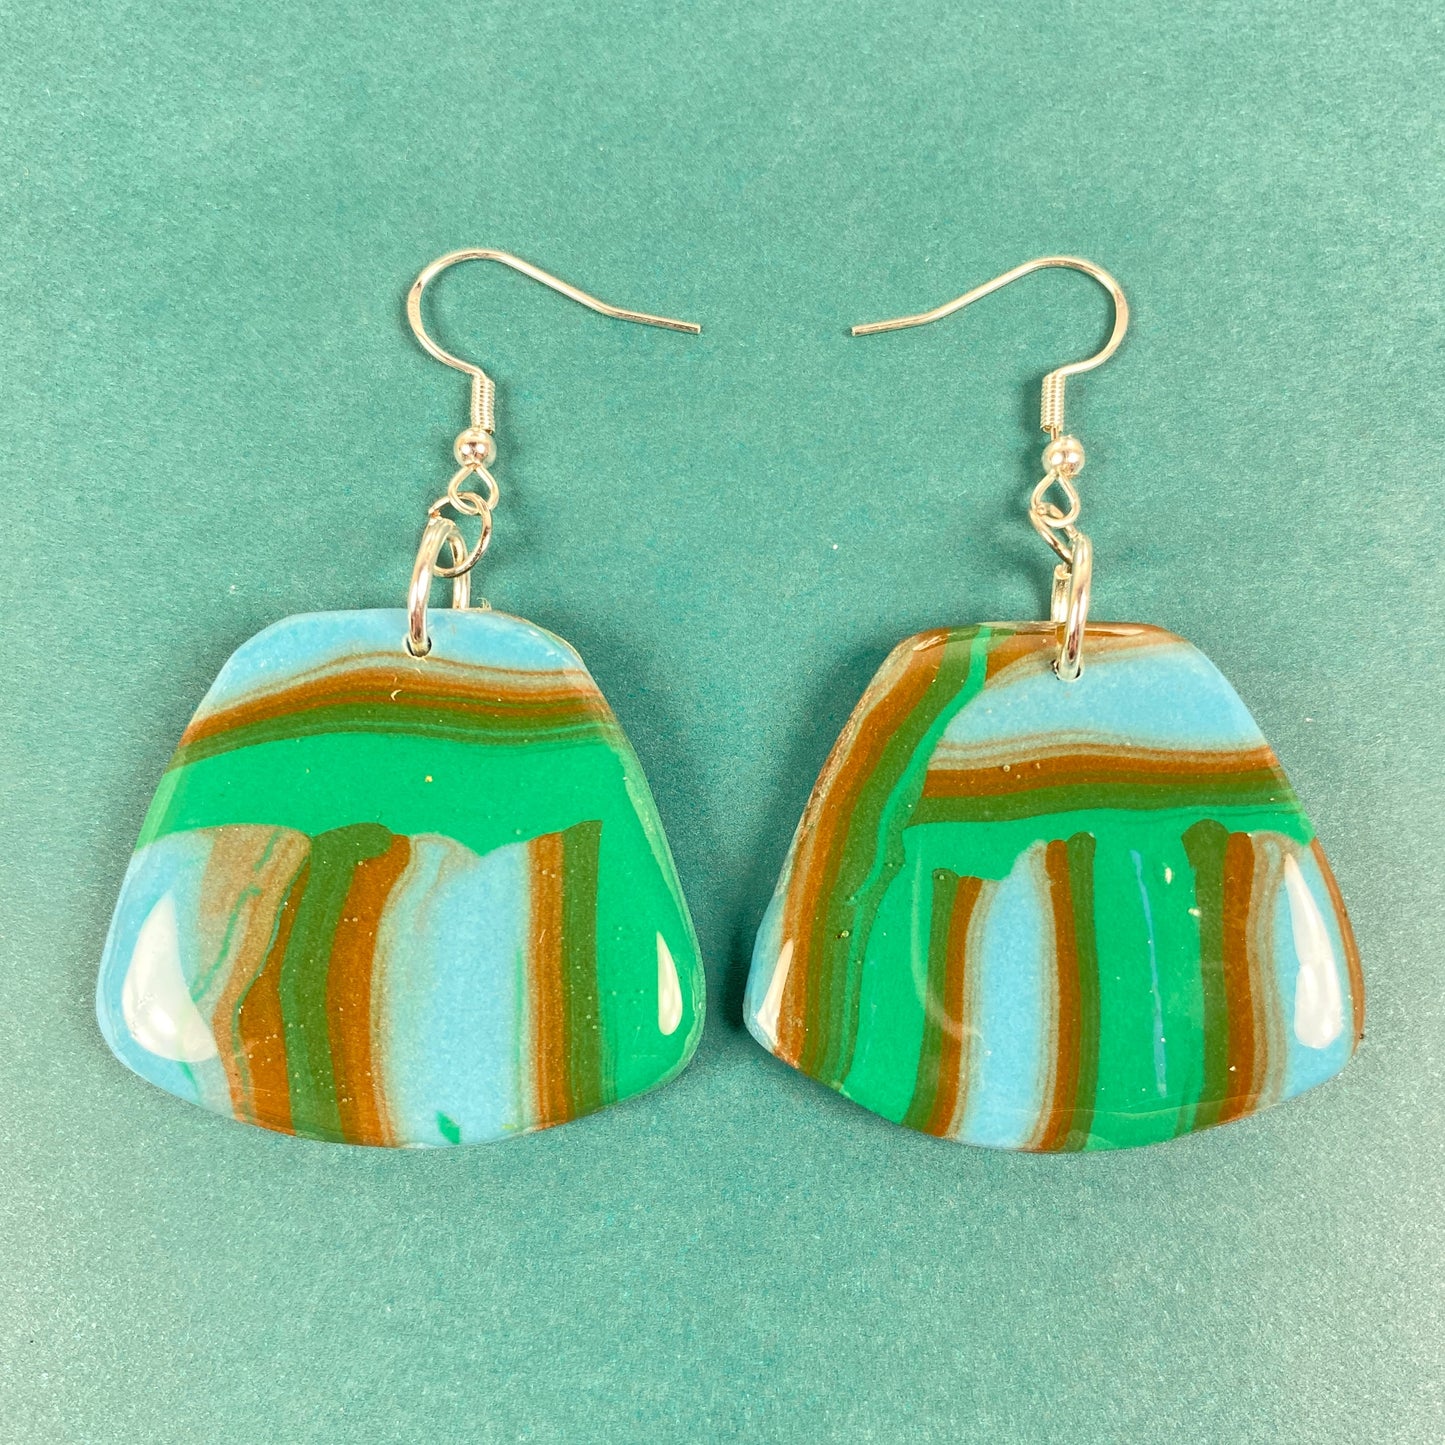 Hip Striped Handmade Polymer Clay Dangle Earrings on blue background